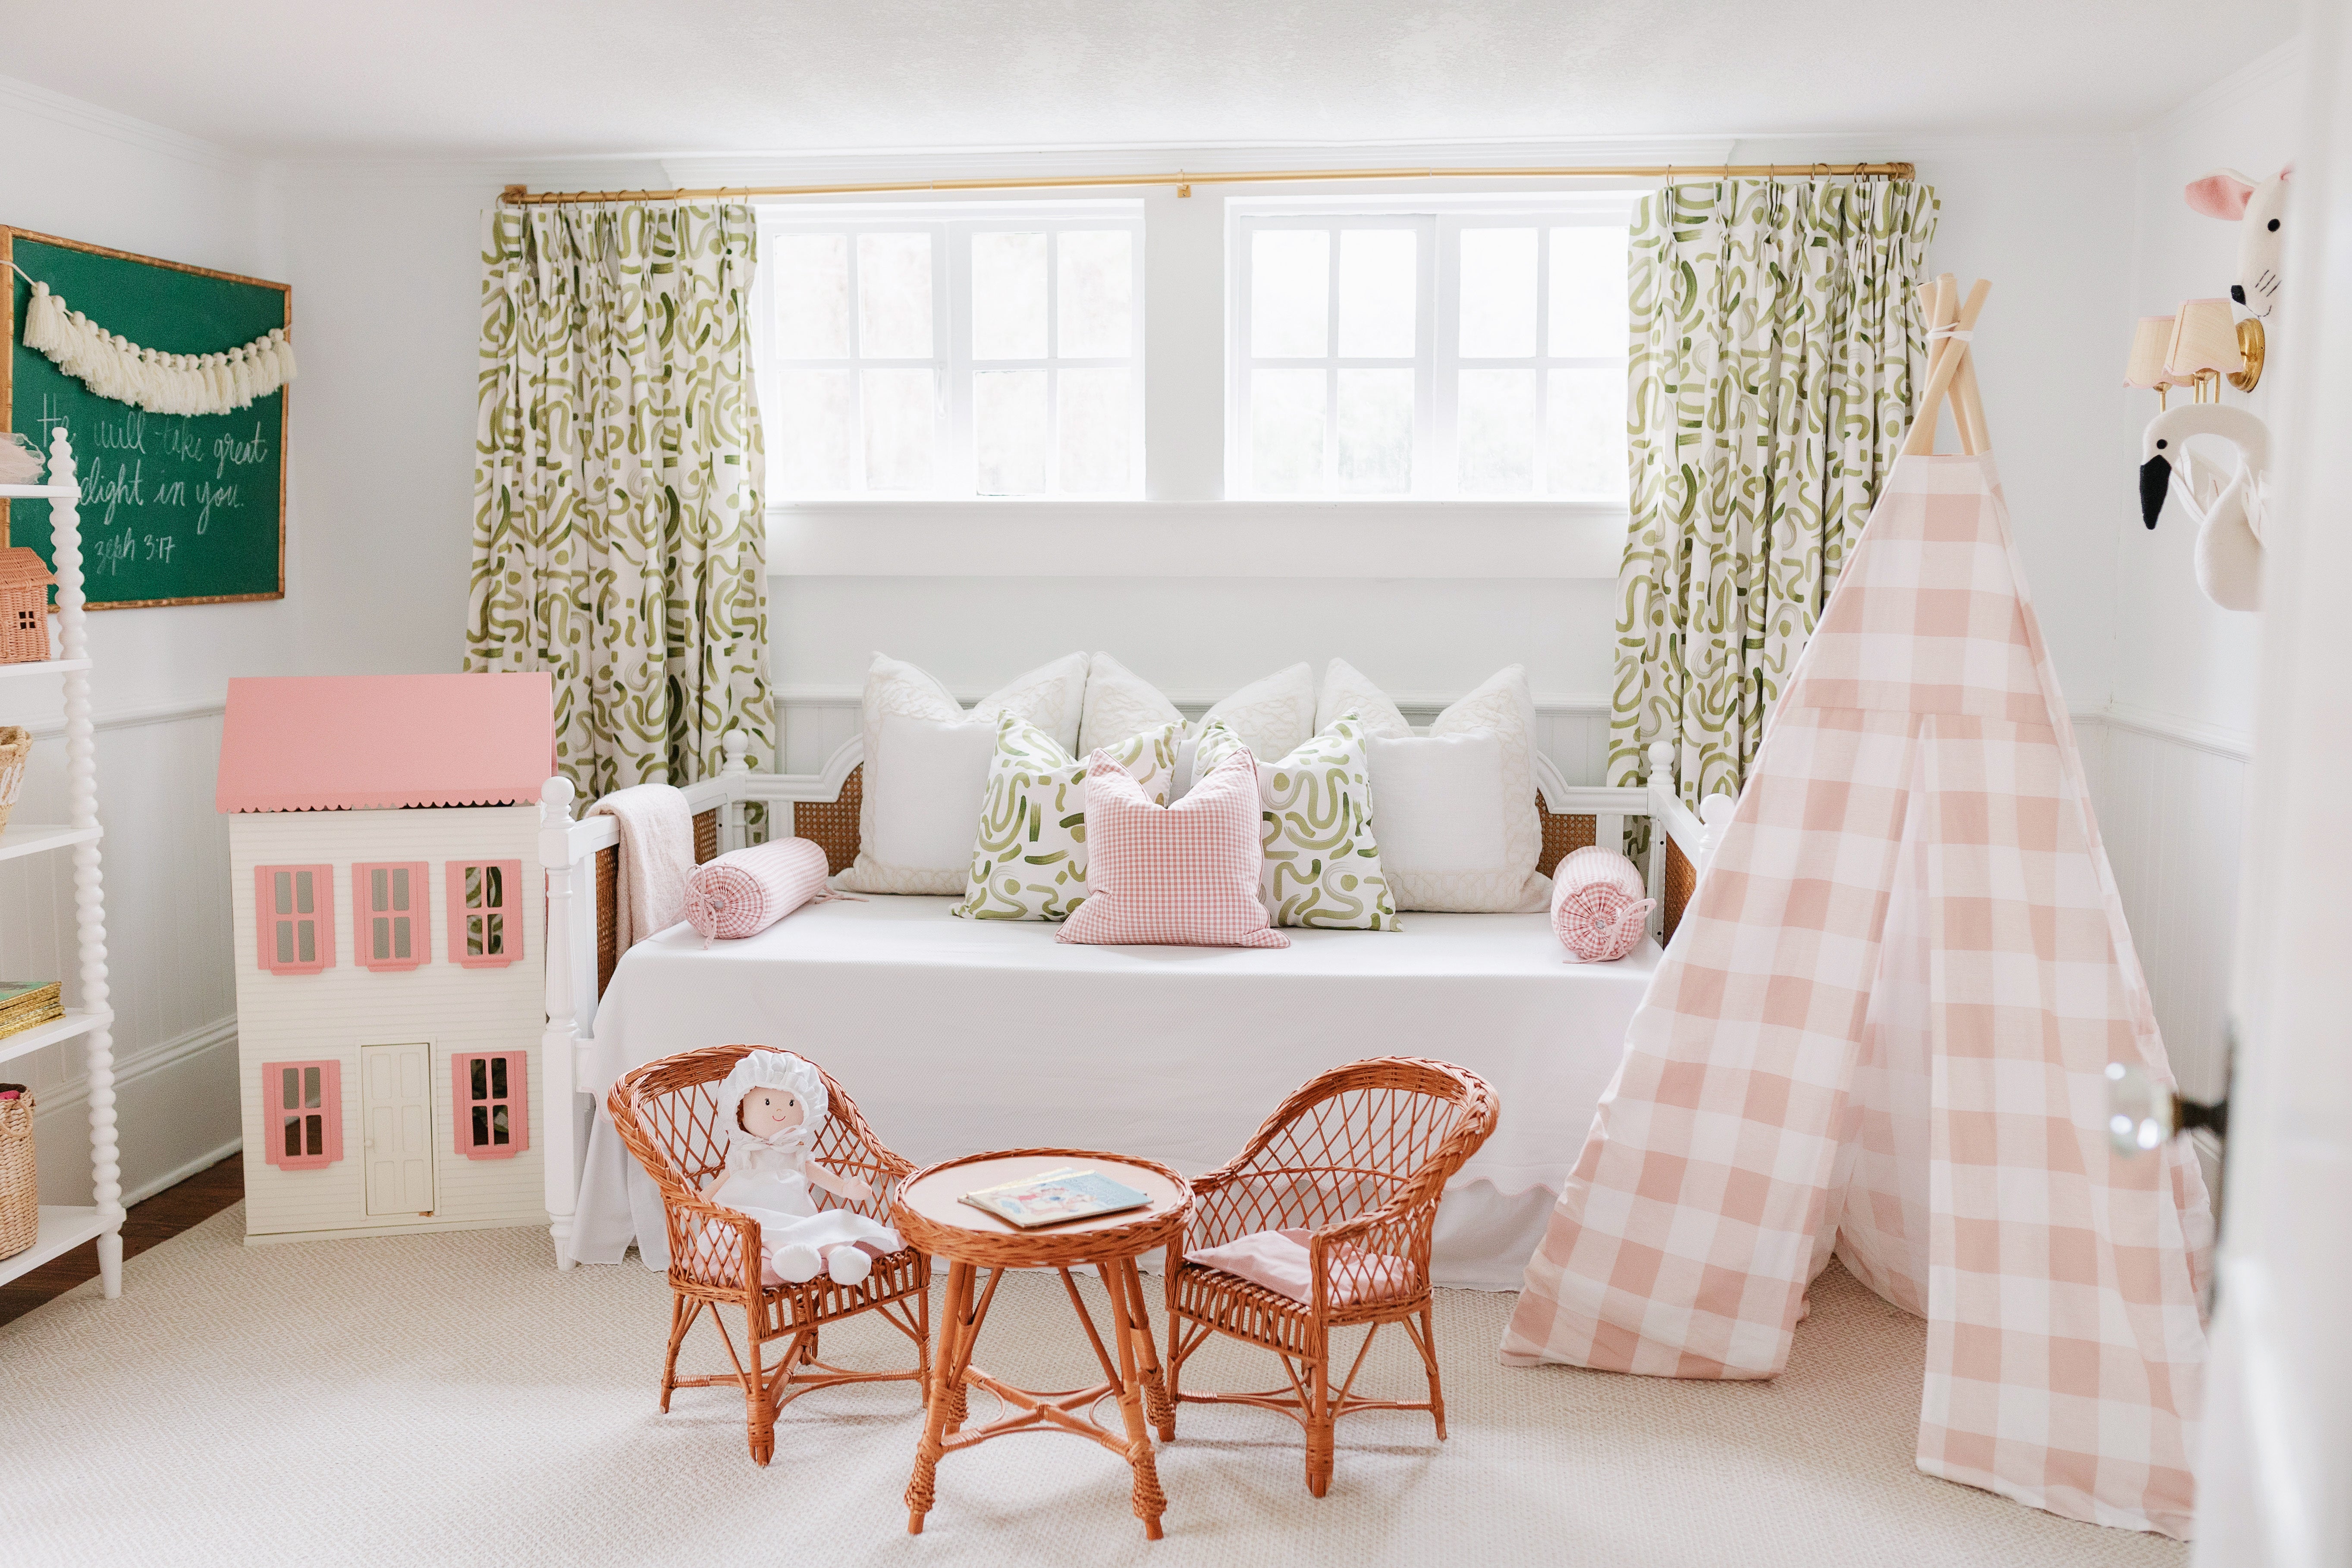 Moss abstract curtain panels hanging on a rod behind a white day bed in a. nursery with a pink gingham tent and rattan kid's furniture